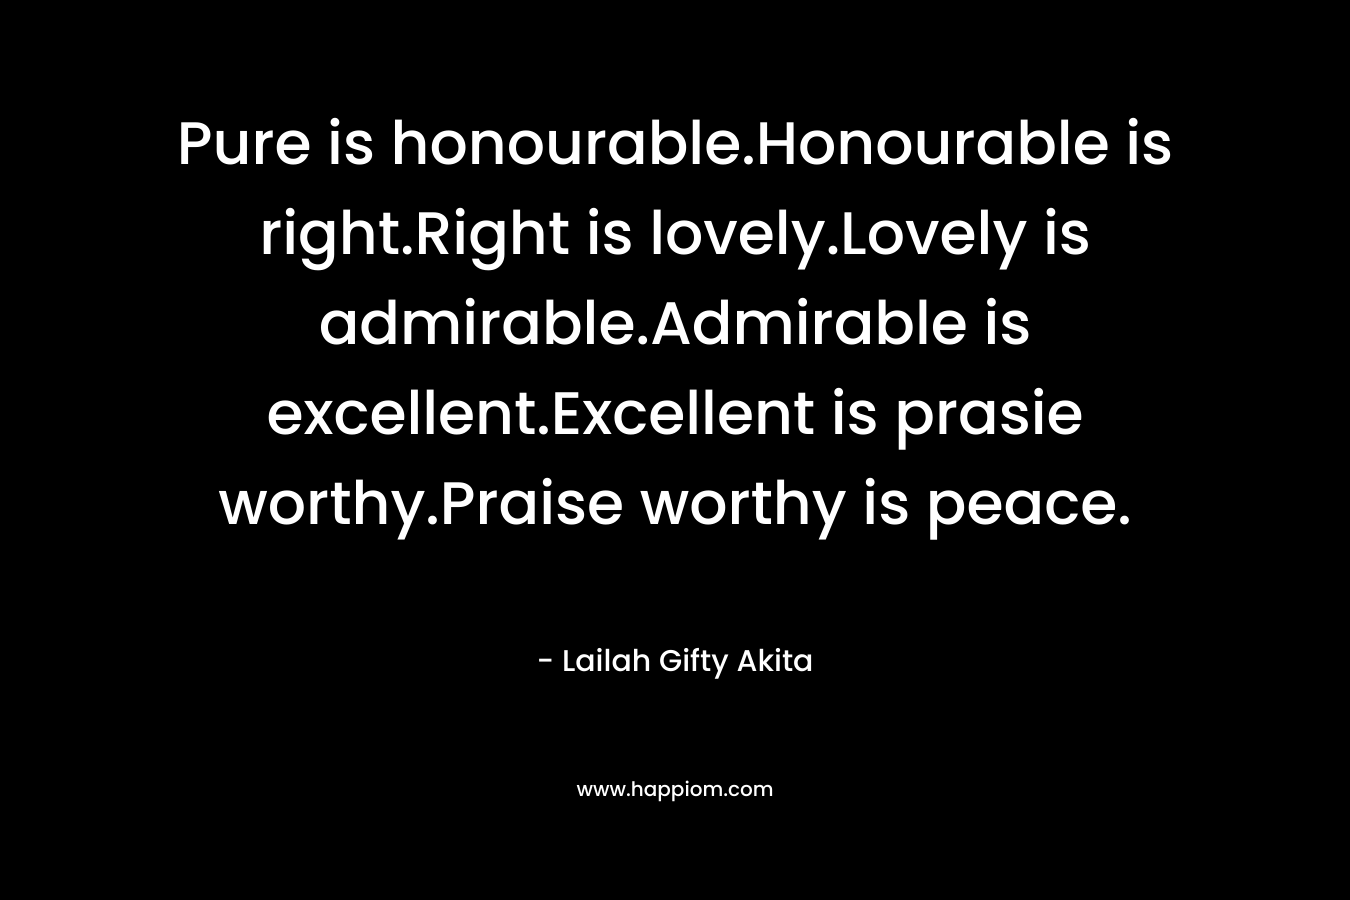 Pure is honourable.Honourable is right.Right is lovely.Lovely is admirable.Admirable is excellent.Excellent is prasie worthy.Praise worthy is peace. – Lailah Gifty Akita